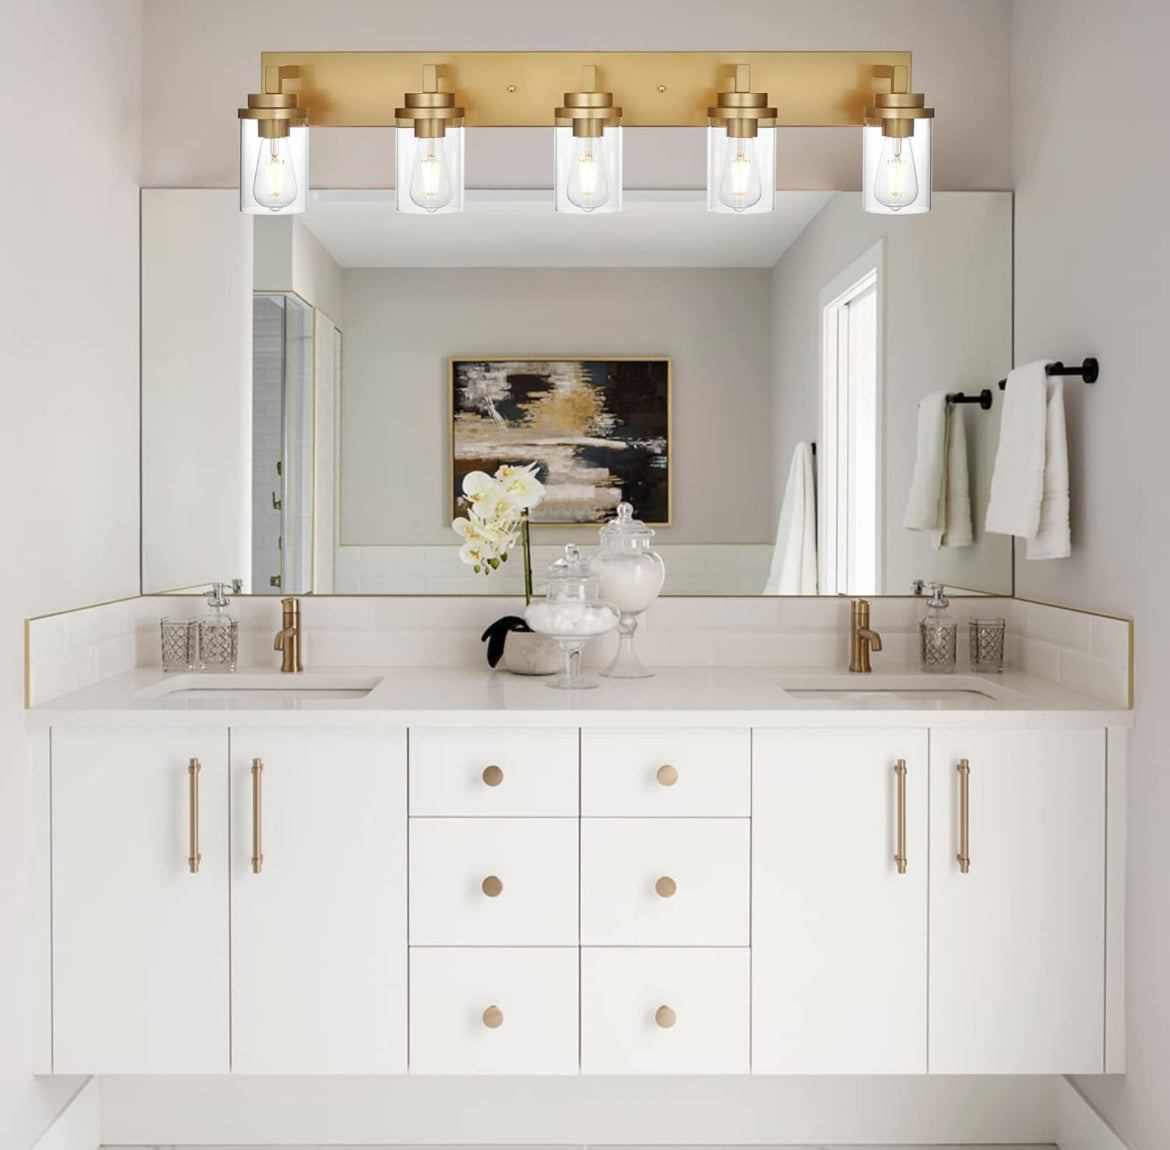 MELUCEE Gold Vanity Lights for Bathroom 40 Inches Length, 5-Light Bathroom Lighting Fixtures Over Mirror Wall Mount Lamp with Clear Glass Shade for Vanity Table/Over Sink/Kitchen - Selzalot